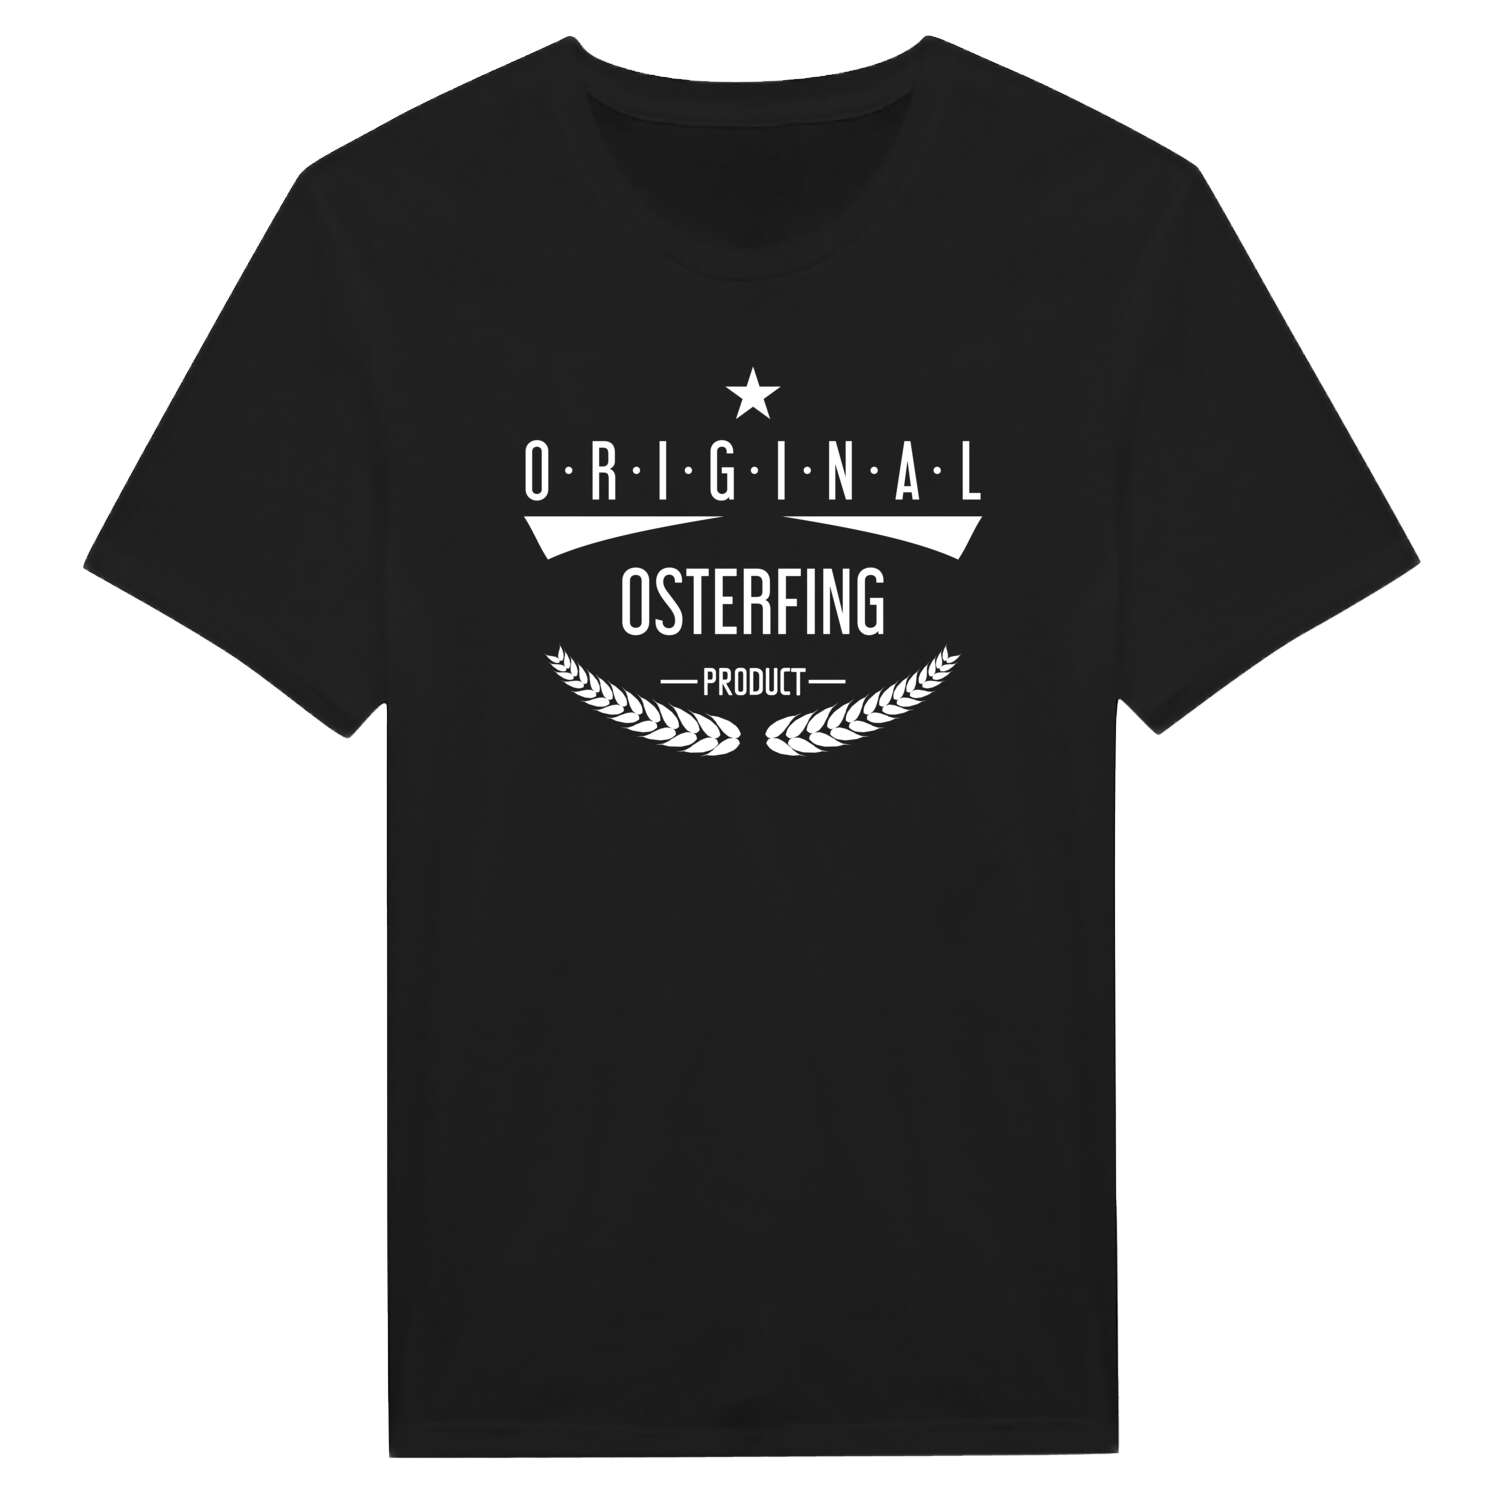 Osterfing T-Shirt »Original Product«